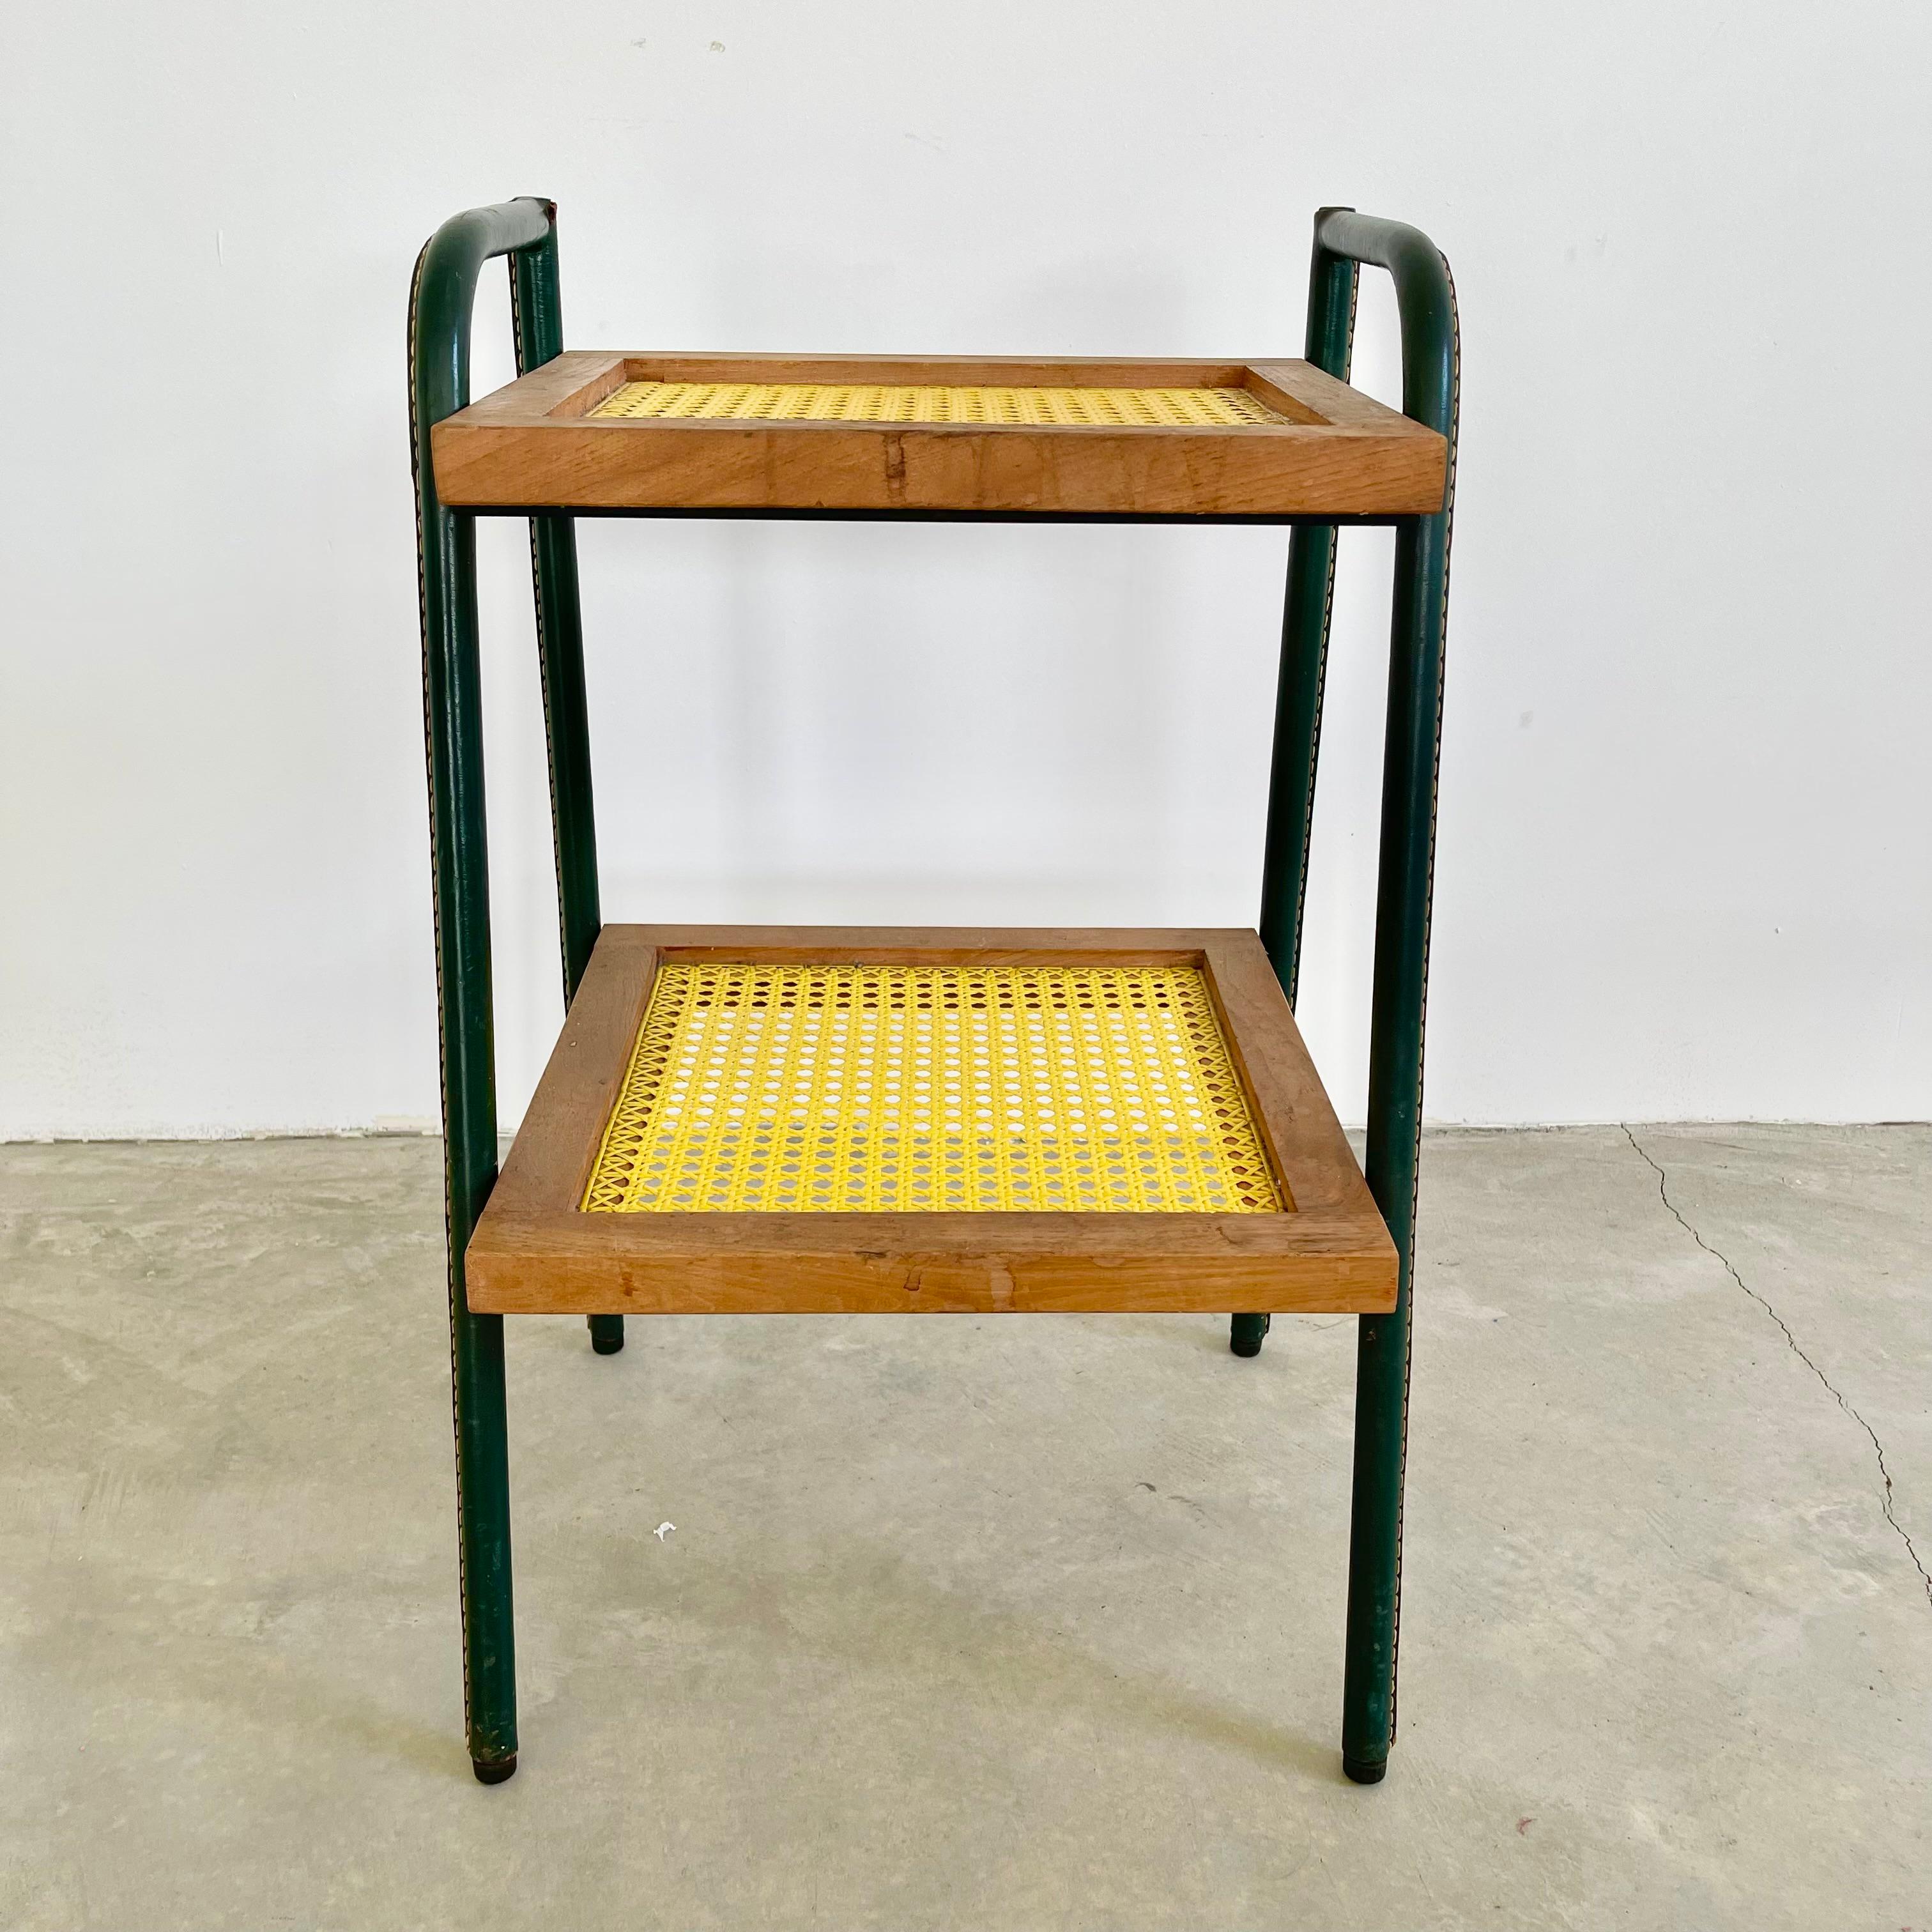 Stunning leather and wood side table by Jacques Adnet. Iron frame completely wrapped in green leather. Yellow table surfaces are made of plastic wicker woven to resemble caning. Signature Adnet contrast stitching. Iron ball feet. Great vintage